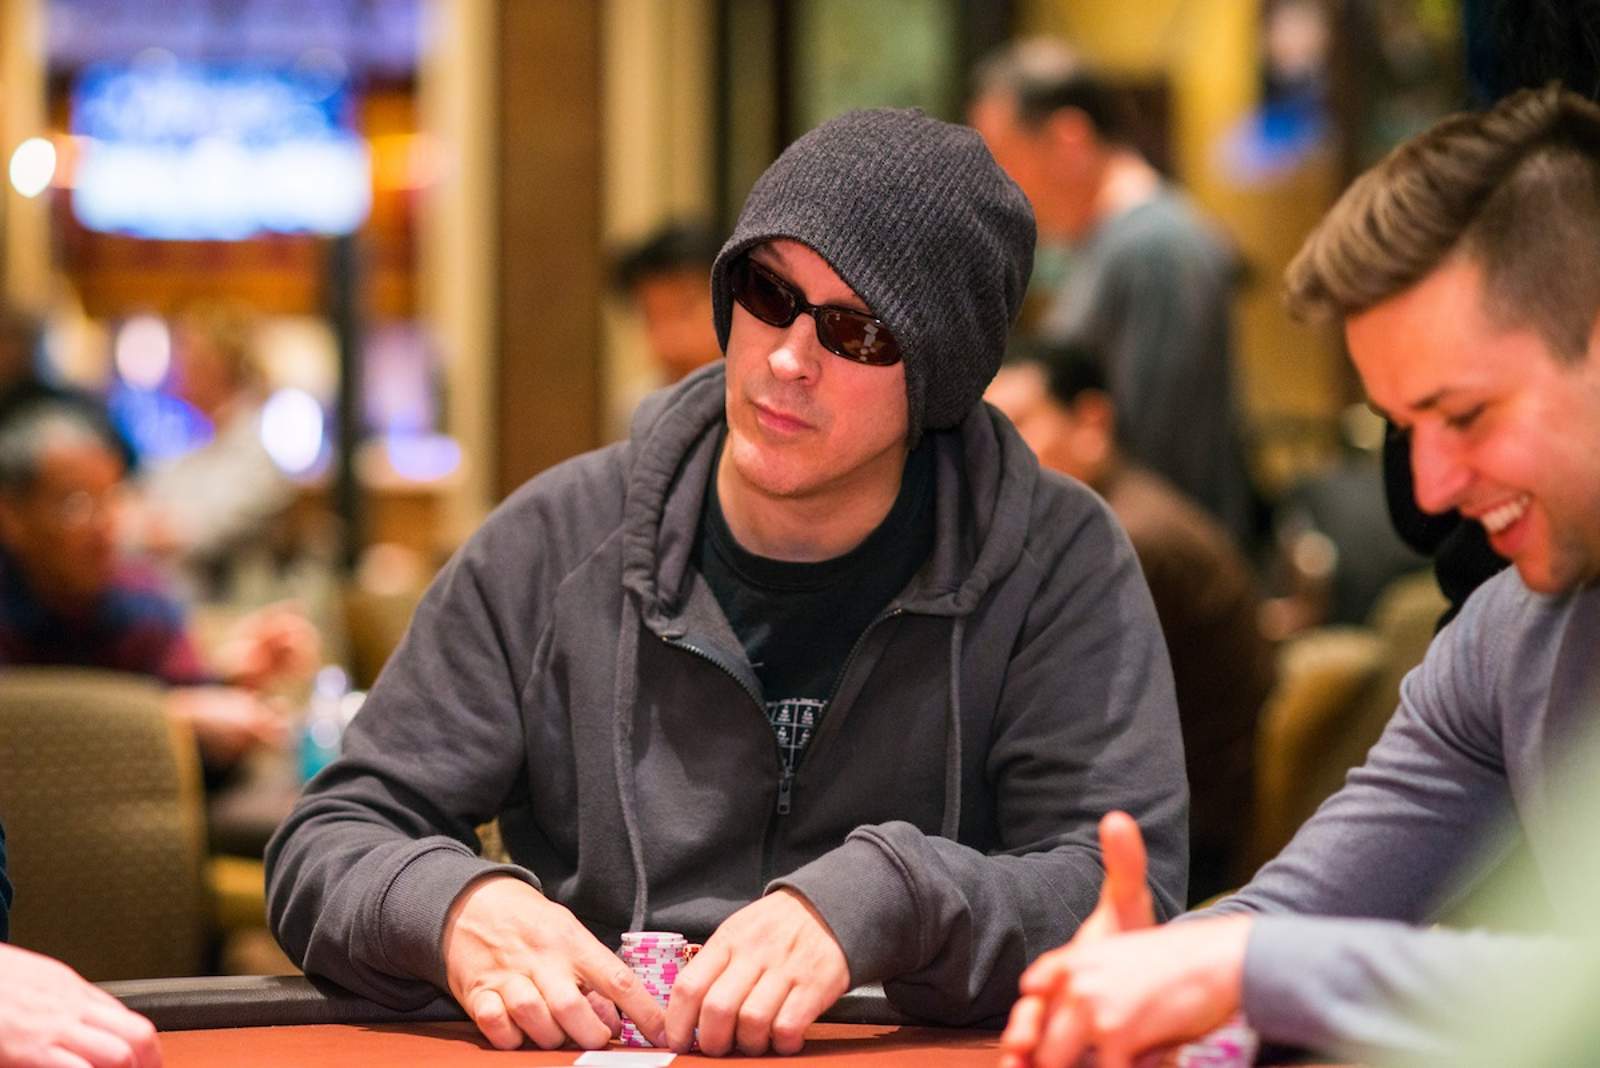 Poker After Dark: Season 1 Champs and Subjective Winners